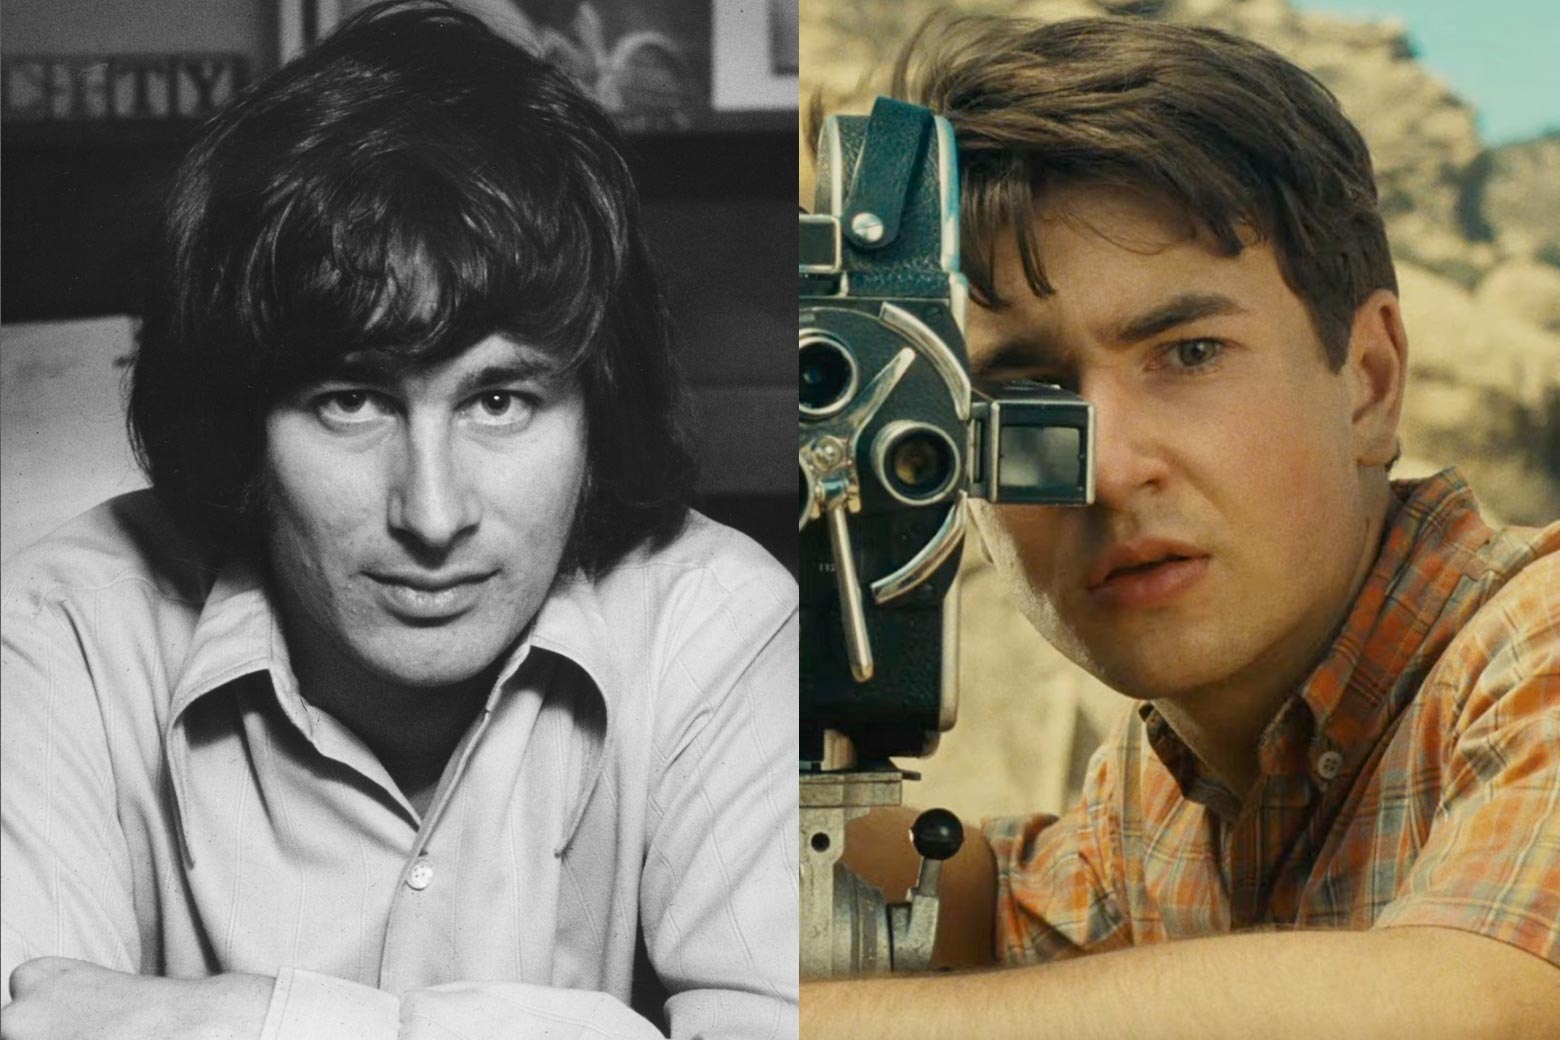 The Fabelmans true story: How Steven Spielberg's new movie rewrites his life. - Slate